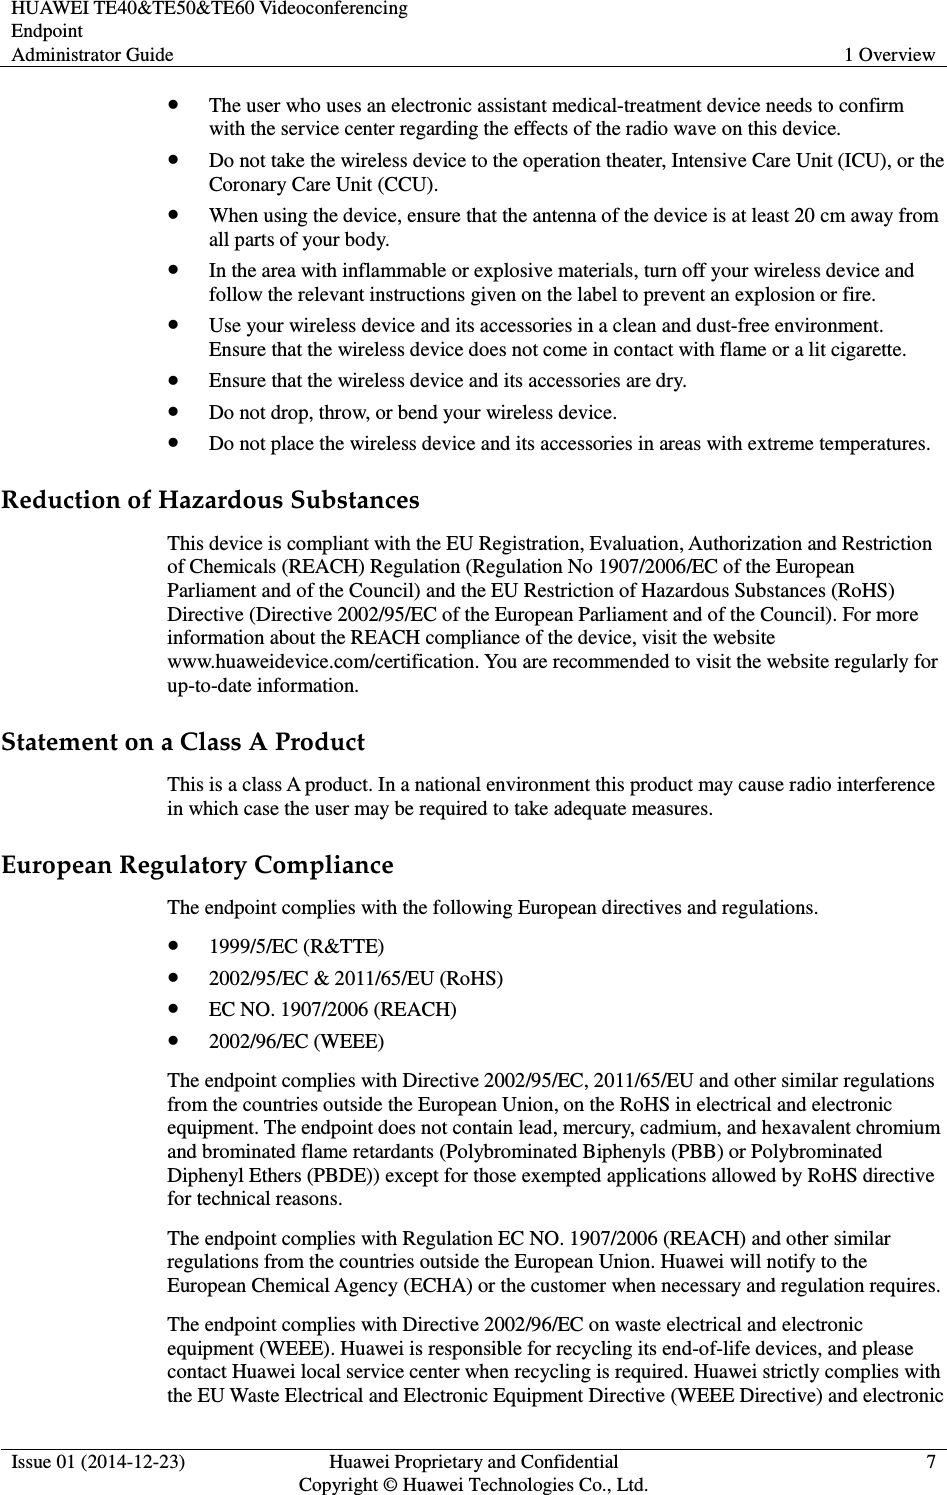 HUAWEI TE40&amp;TE50&amp;TE60 Videoconferencing Endpoint Administrator Guide  1 Overview  Issue 01 (2014-12-23)  Huawei Proprietary and Confidential                                     Copyright © Huawei Technologies Co., Ltd. 7   The user who uses an electronic assistant medical-treatment device needs to confirm with the service center regarding the effects of the radio wave on this device.  Do not take the wireless device to the operation theater, Intensive Care Unit (ICU), or the Coronary Care Unit (CCU).  When using the device, ensure that the antenna of the device is at least 20 cm away from all parts of your body.  In the area with inflammable or explosive materials, turn off your wireless device and follow the relevant instructions given on the label to prevent an explosion or fire.  Use your wireless device and its accessories in a clean and dust-free environment. Ensure that the wireless device does not come in contact with flame or a lit cigarette.  Ensure that the wireless device and its accessories are dry.  Do not drop, throw, or bend your wireless device.  Do not place the wireless device and its accessories in areas with extreme temperatures. Reduction of Hazardous Substances This device is compliant with the EU Registration, Evaluation, Authorization and Restriction of Chemicals (REACH) Regulation (Regulation No 1907/2006/EC of the European Parliament and of the Council) and the EU Restriction of Hazardous Substances (RoHS) Directive (Directive 2002/95/EC of the European Parliament and of the Council). For more information about the REACH compliance of the device, visit the website www.huaweidevice.com/certification. You are recommended to visit the website regularly for up-to-date information. Statement on a Class A Product This is a class A product. In a national environment this product may cause radio interference in which case the user may be required to take adequate measures.   European Regulatory Compliance The endpoint complies with the following European directives and regulations.  1999/5/EC (R&amp;TTE)  2002/95/EC &amp; 2011/65/EU (RoHS)  EC NO. 1907/2006 (REACH)  2002/96/EC (WEEE) The endpoint complies with Directive 2002/95/EC, 2011/65/EU and other similar regulations from the countries outside the European Union, on the RoHS in electrical and electronic equipment. The endpoint does not contain lead, mercury, cadmium, and hexavalent chromium and brominated flame retardants (Polybrominated Biphenyls (PBB) or Polybrominated Diphenyl Ethers (PBDE)) except for those exempted applications allowed by RoHS directive for technical reasons. The endpoint complies with Regulation EC NO. 1907/2006 (REACH) and other similar regulations from the countries outside the European Union. Huawei will notify to the European Chemical Agency (ECHA) or the customer when necessary and regulation requires. The endpoint complies with Directive 2002/96/EC on waste electrical and electronic equipment (WEEE). Huawei is responsible for recycling its end-of-life devices, and please contact Huawei local service center when recycling is required. Huawei strictly complies with the EU Waste Electrical and Electronic Equipment Directive (WEEE Directive) and electronic 